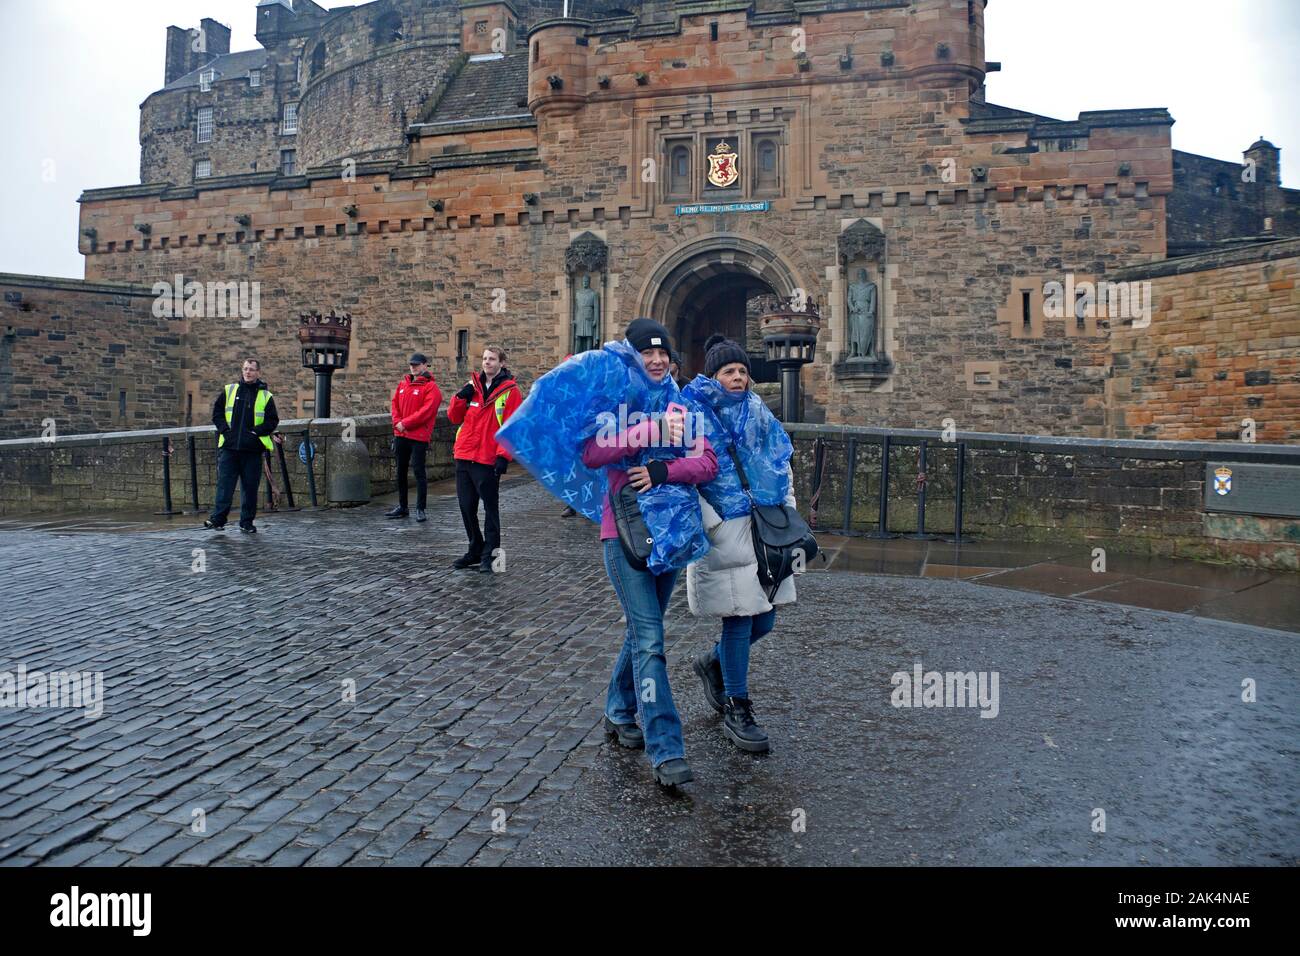 Edinburgh, Scotland, UK. 7th January 2020. Edinburgh Castle closed for the day at 11.30am due to a Yellow Warning for extremely high winds. Wind SSW 50km/h potential gusts of 87 km/h. These two Argentinian ladies with their Scottish capes billowing were disappointed to be turned away. Stock Photo